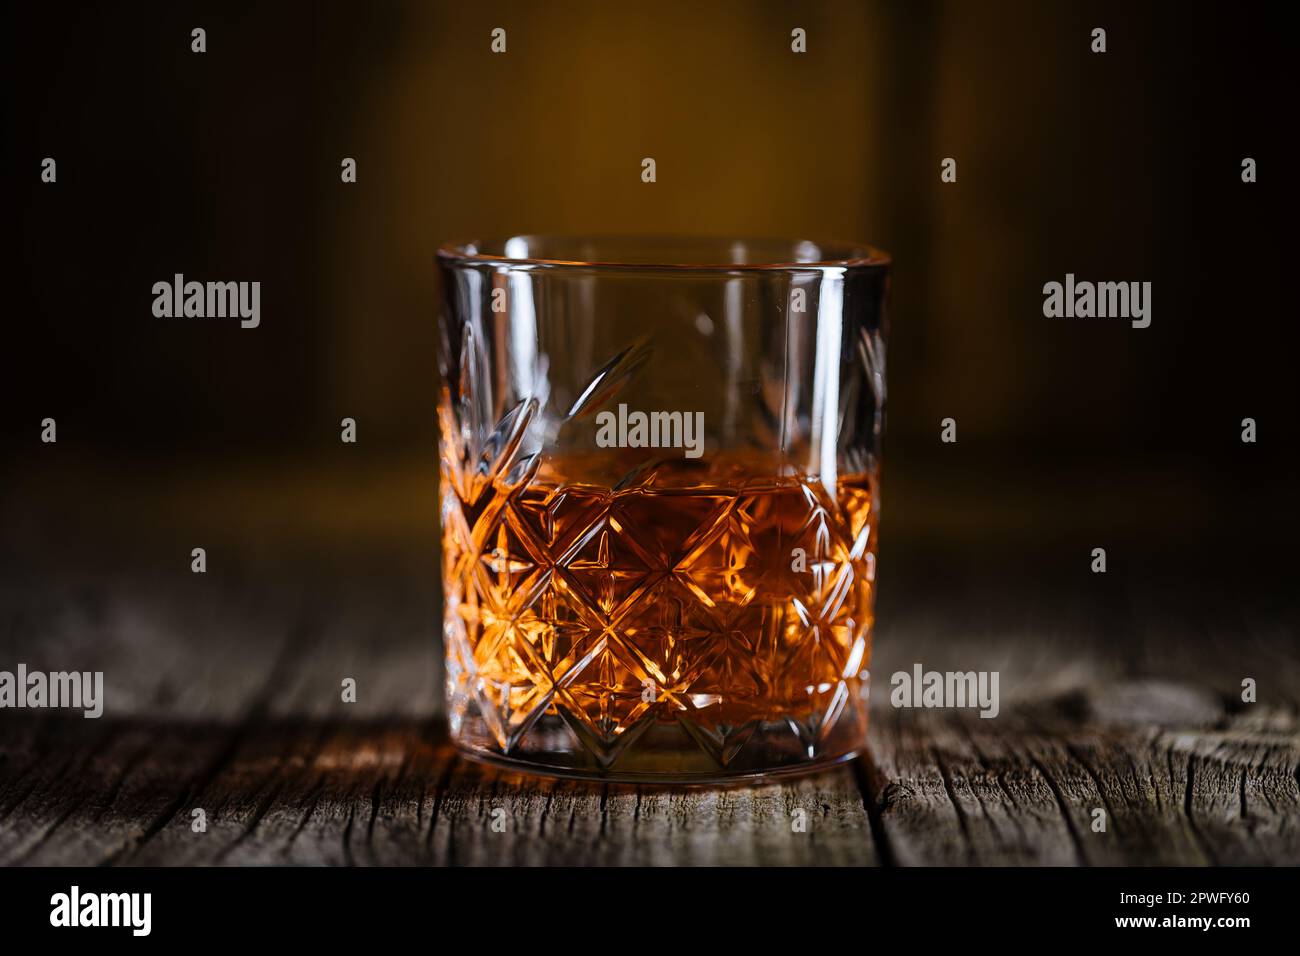 Whiskey with ice or brandy in a glass on a rustic wooden table. Whiskey with ice in a glass. Whiskey or cognac in a glass. Selective focus. Stock Photo